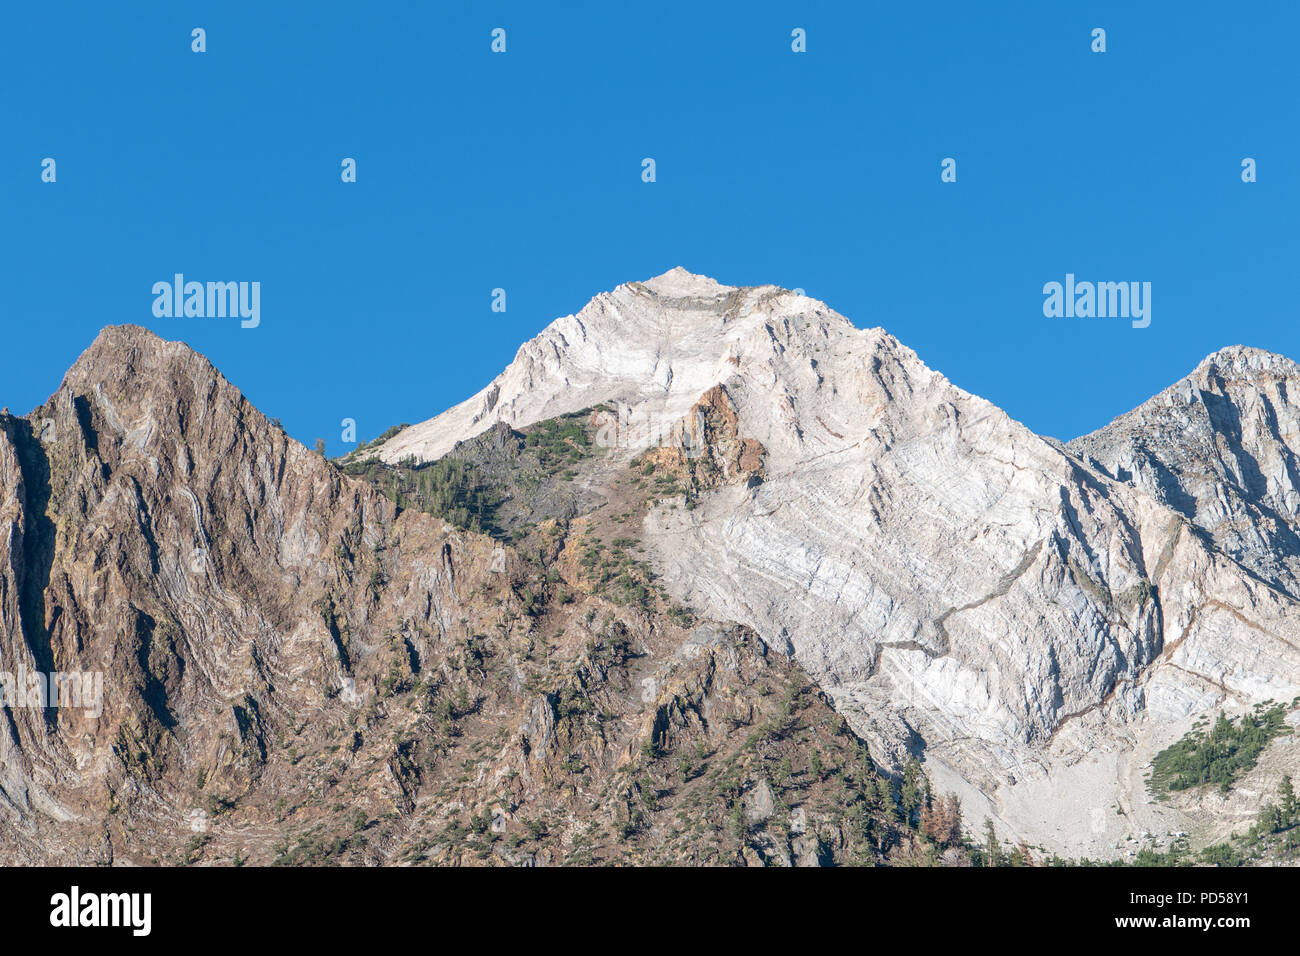 Mountain peaks under a perfect blue sky in the John Muir Wilderness of California's eastern Sierra Nevada mountains Stock Photo